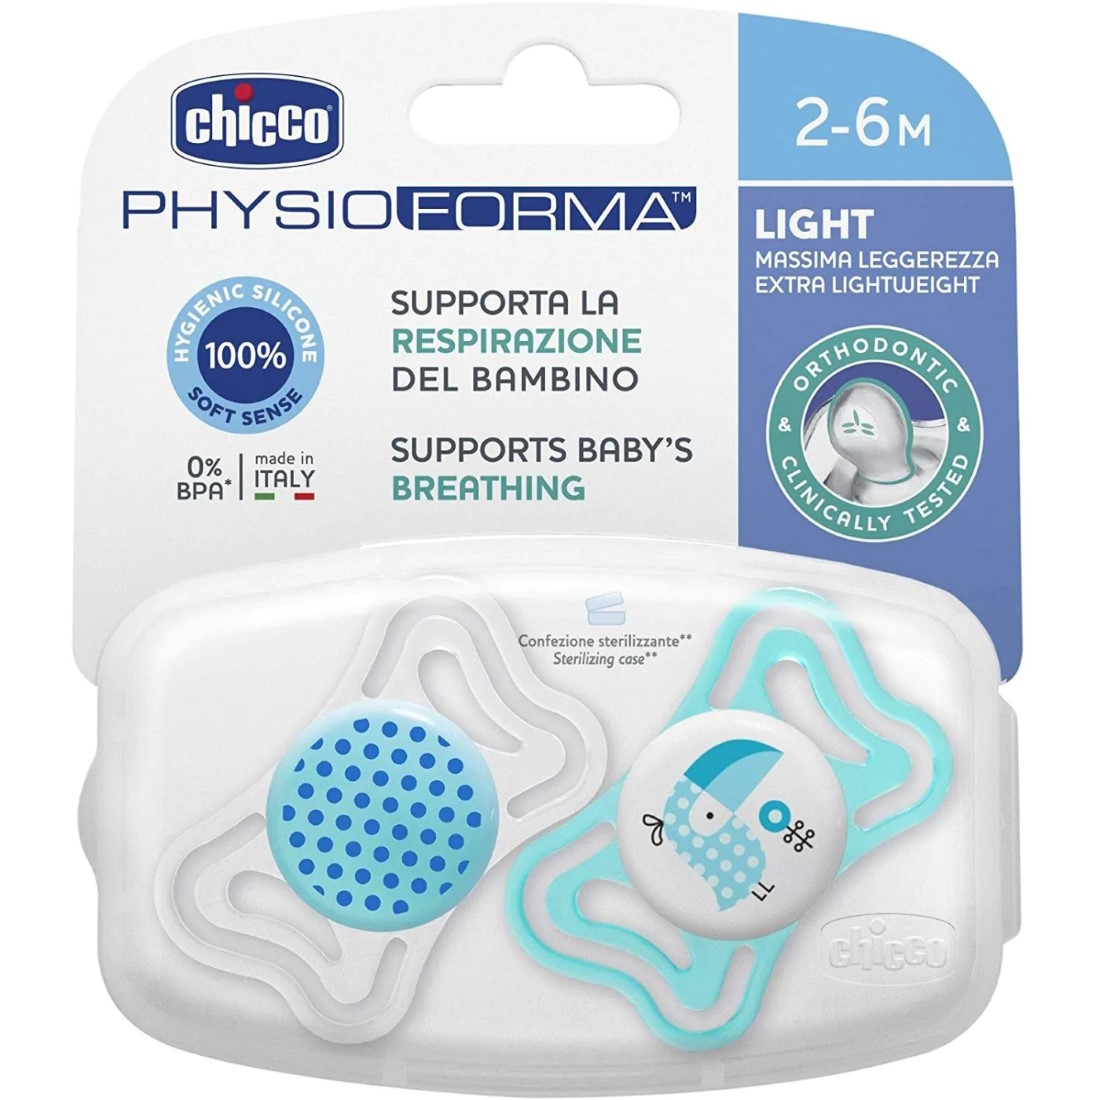 Chicco-PhysioForma-2-6m-7103121-BD-a